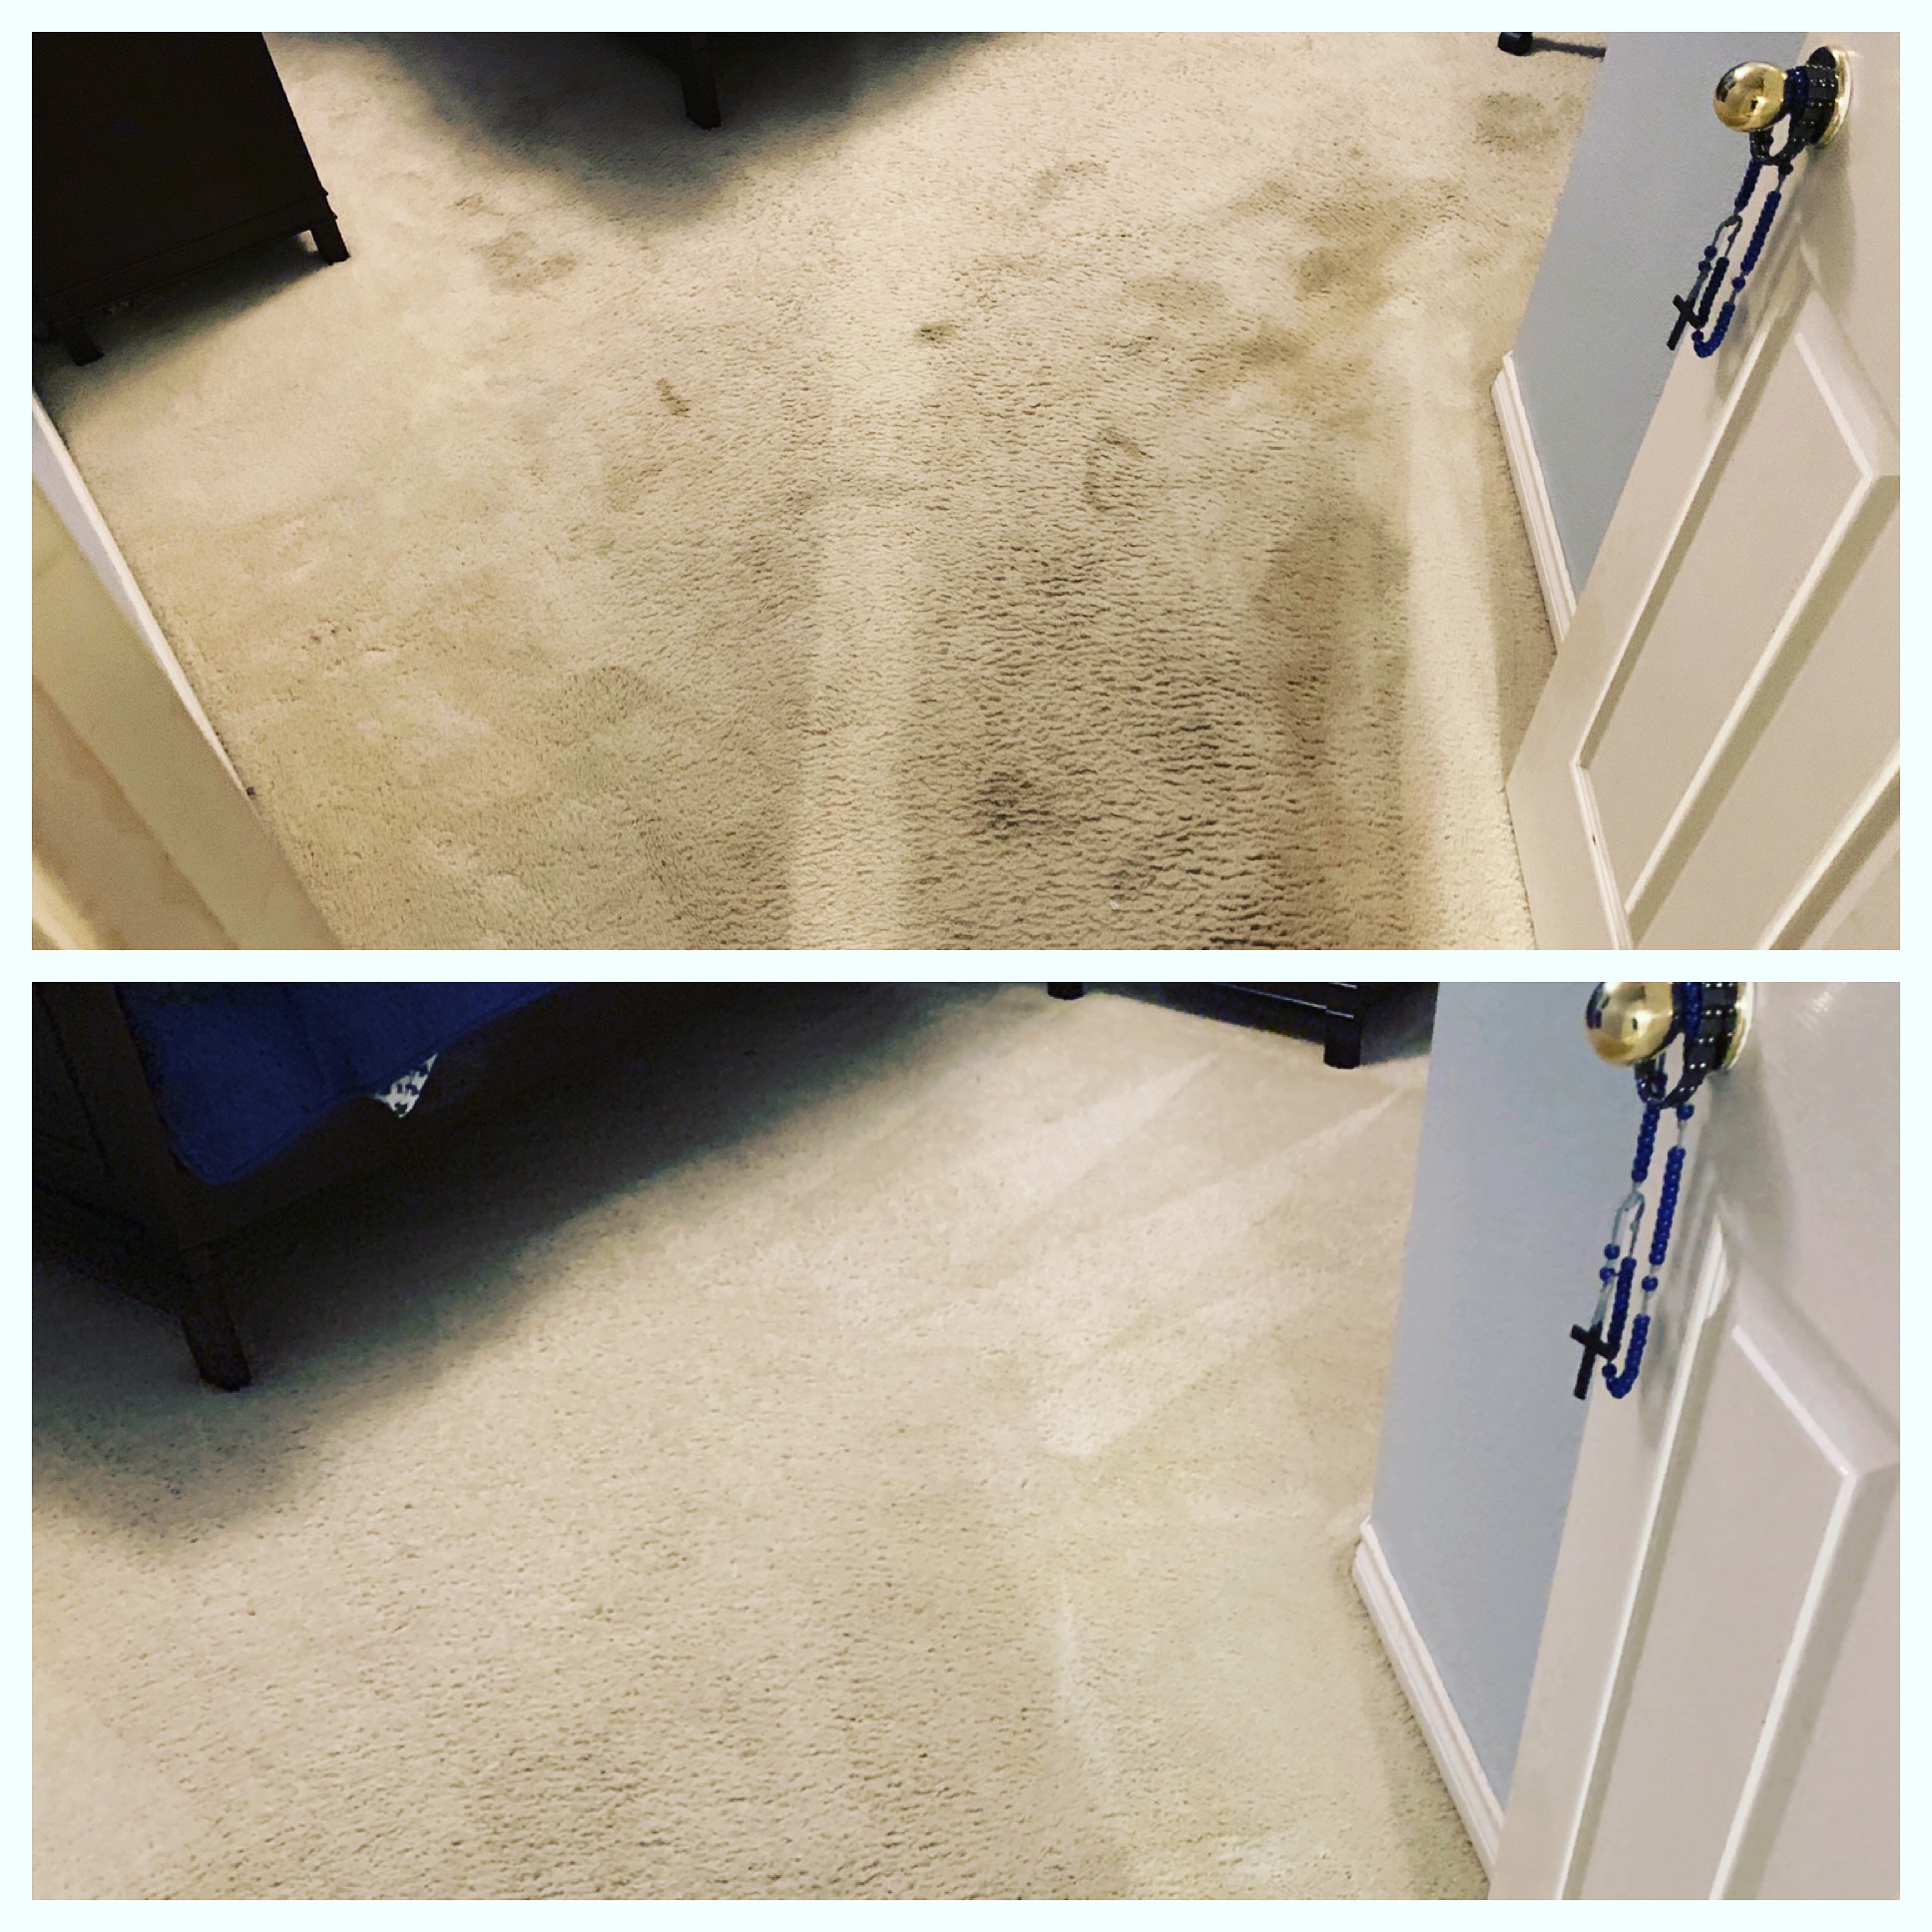 Before And After Carpet Cleaning San Antonio